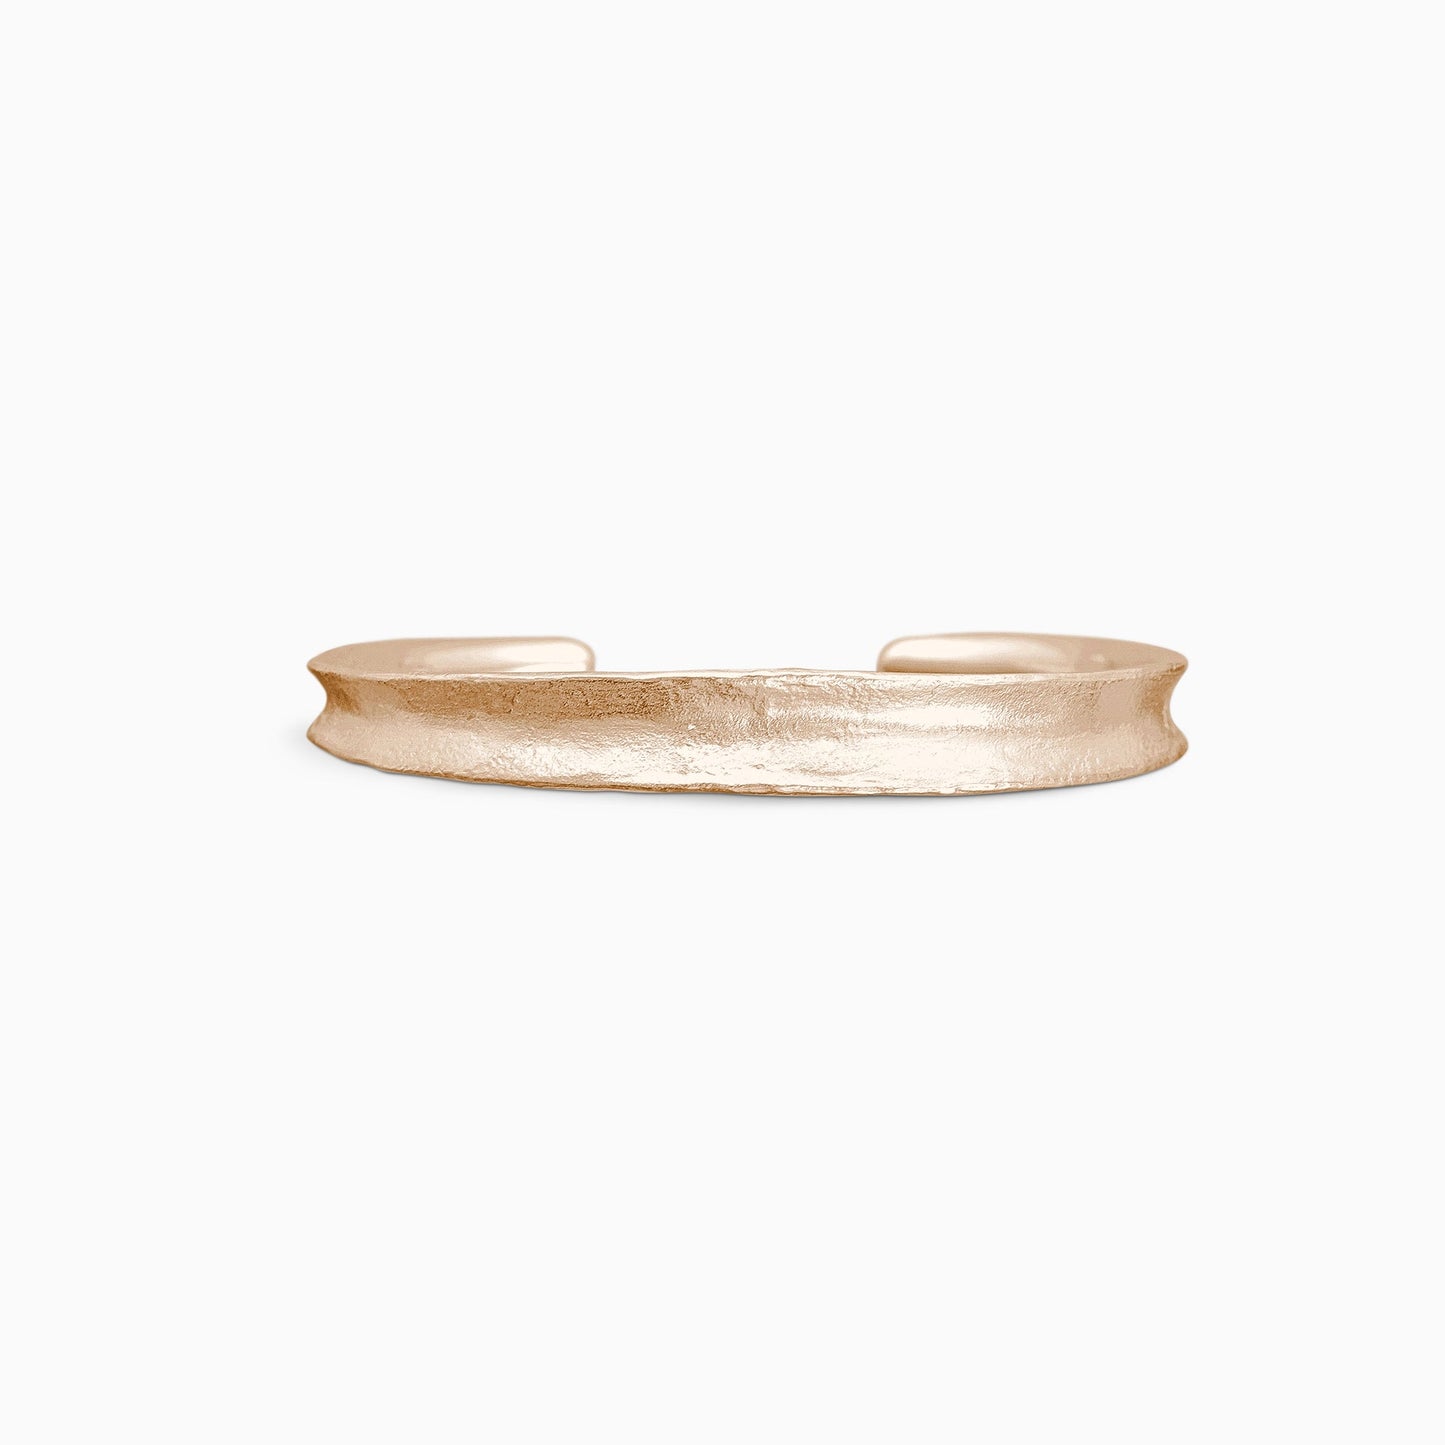 An 18ct Fairtrade rose gold Cuff bangle fitting close to wrist. Concave and textured. Open ended to get on and off. Width 8mm. Inside oval diameter 65mm.